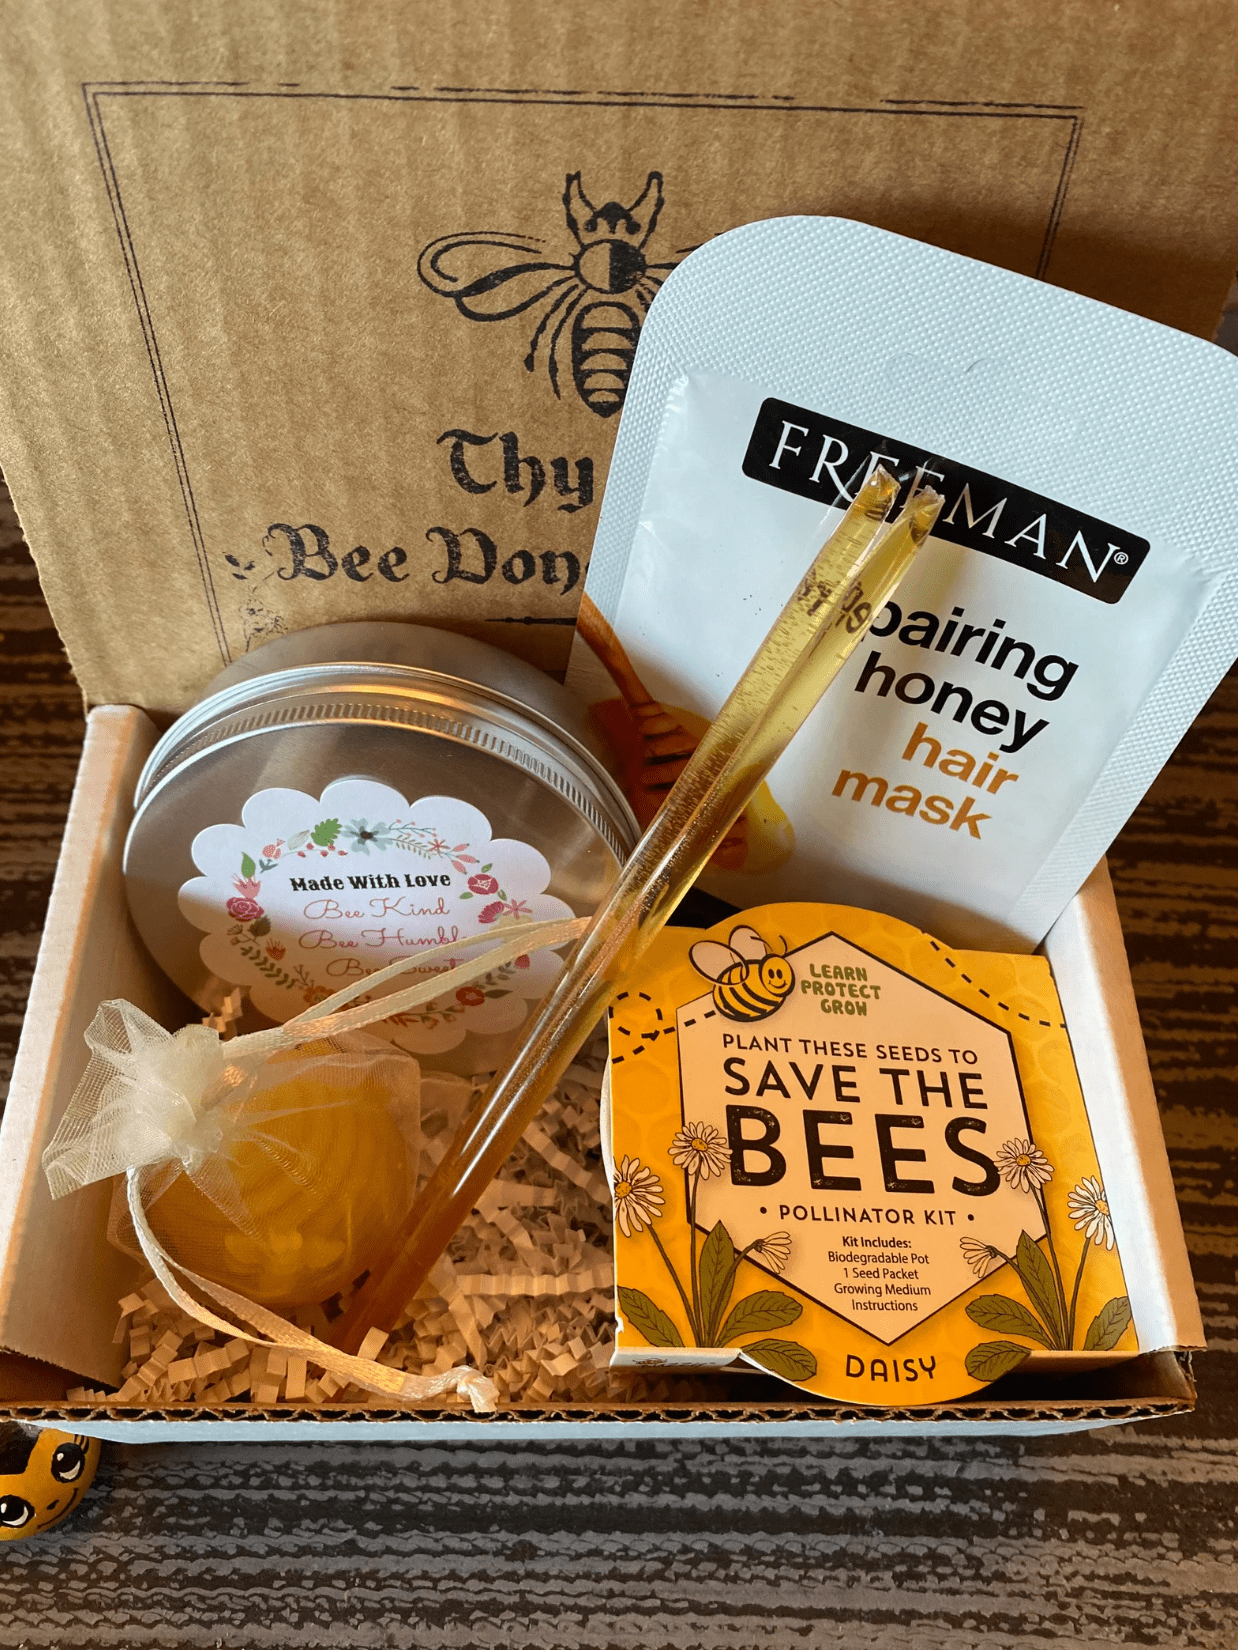 25 Beeautiful Gift Ideas For Bee Lovers and Honey Addicts